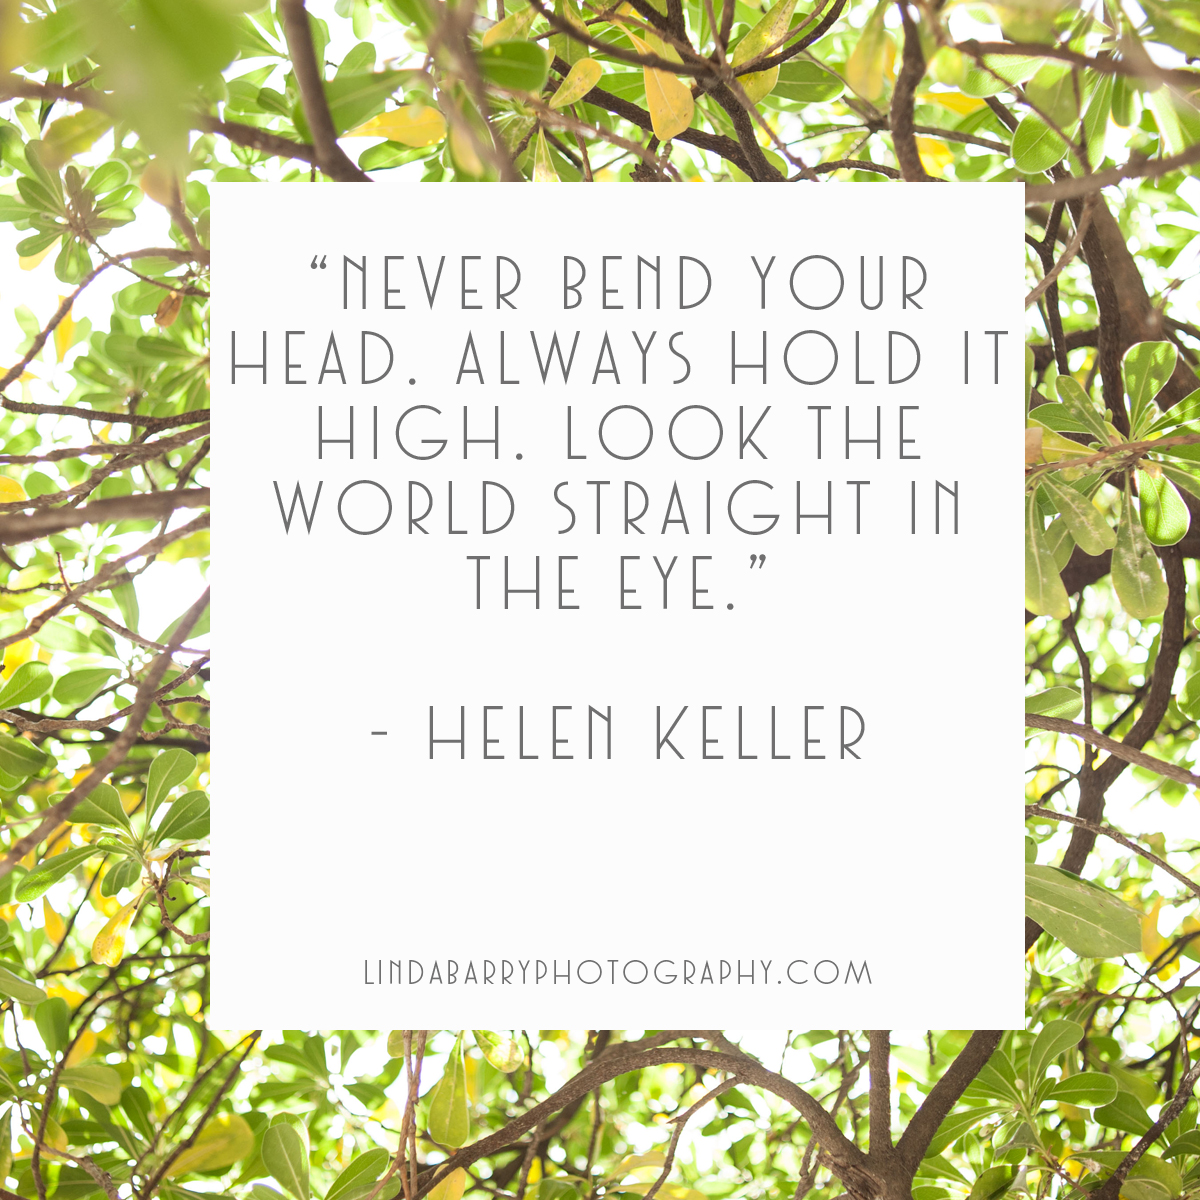 "Never bend your head. Always hold it high. Look the world straight in the eye." Hellen Keller inspirational quote.